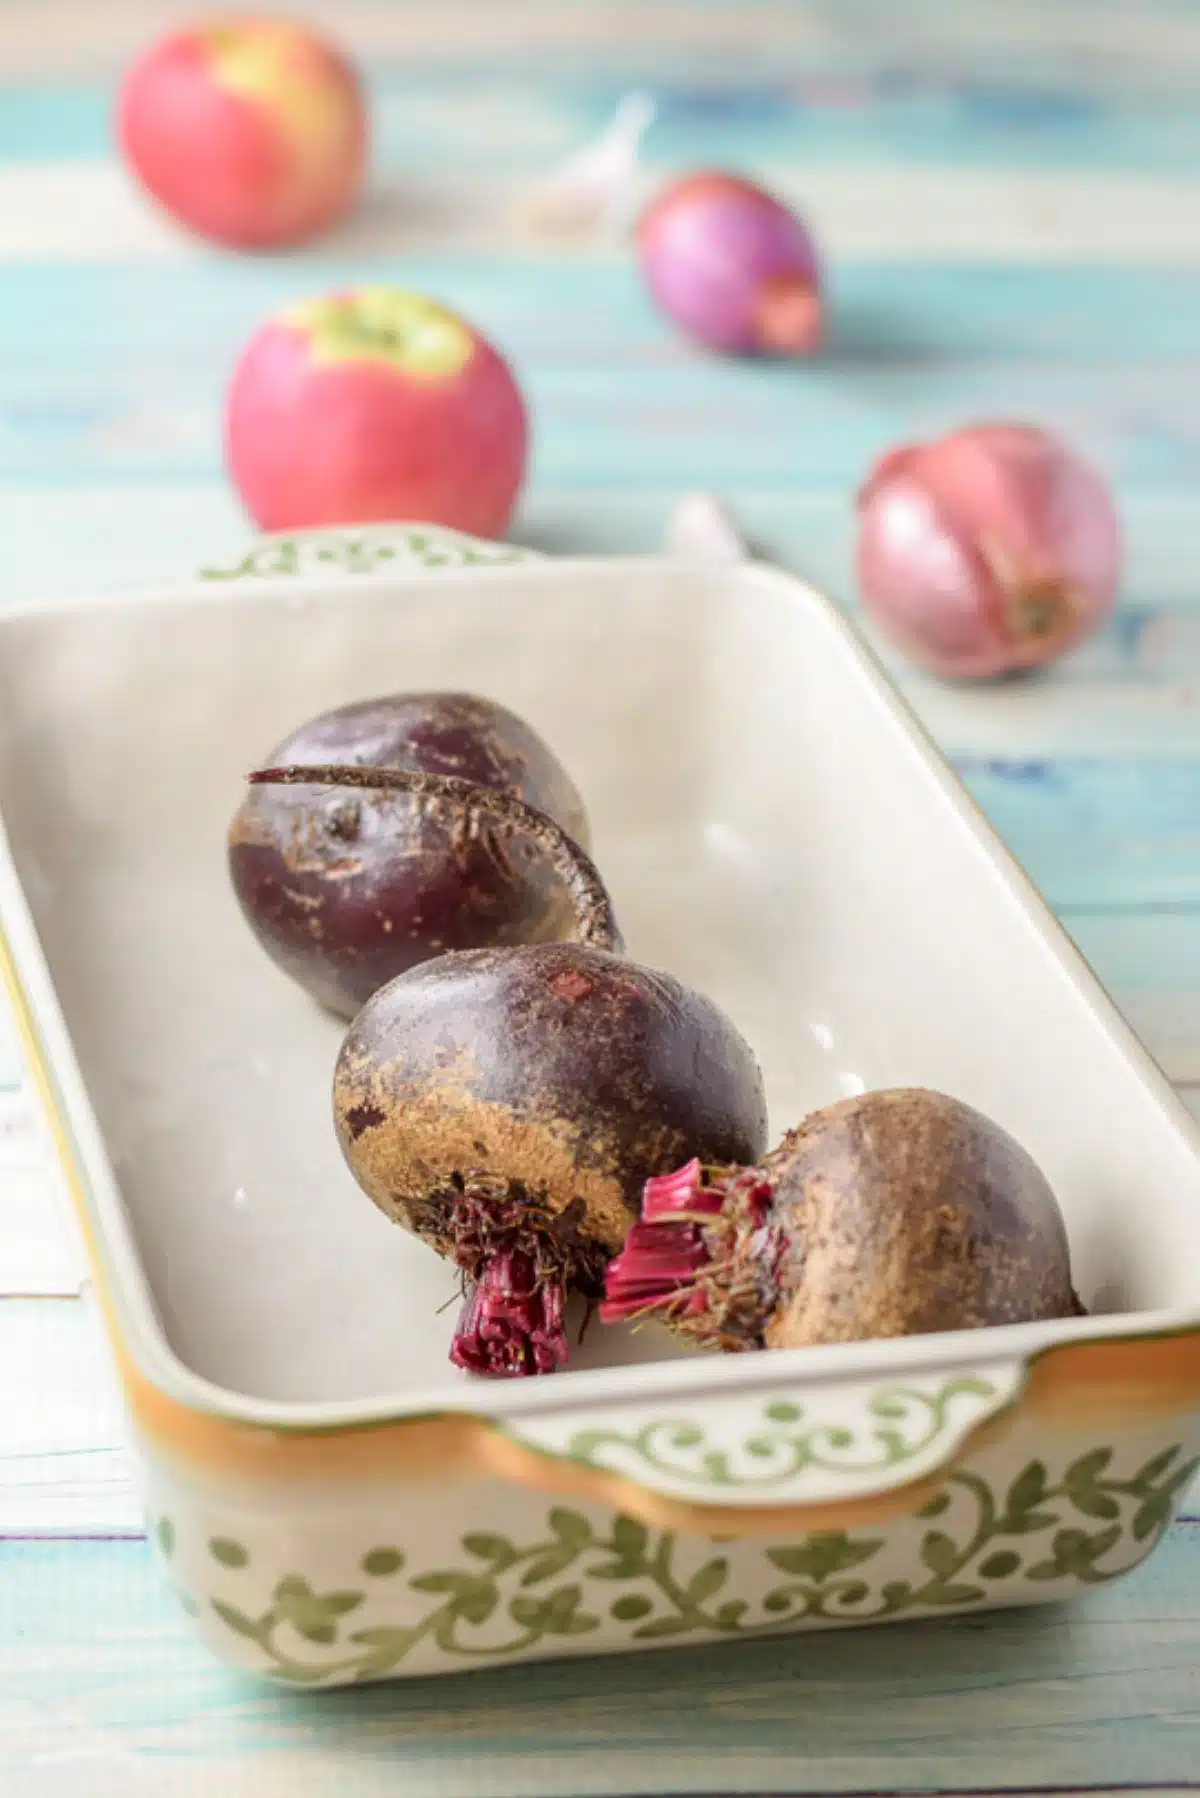 Beets in a baking dish with shallots and apples in the background